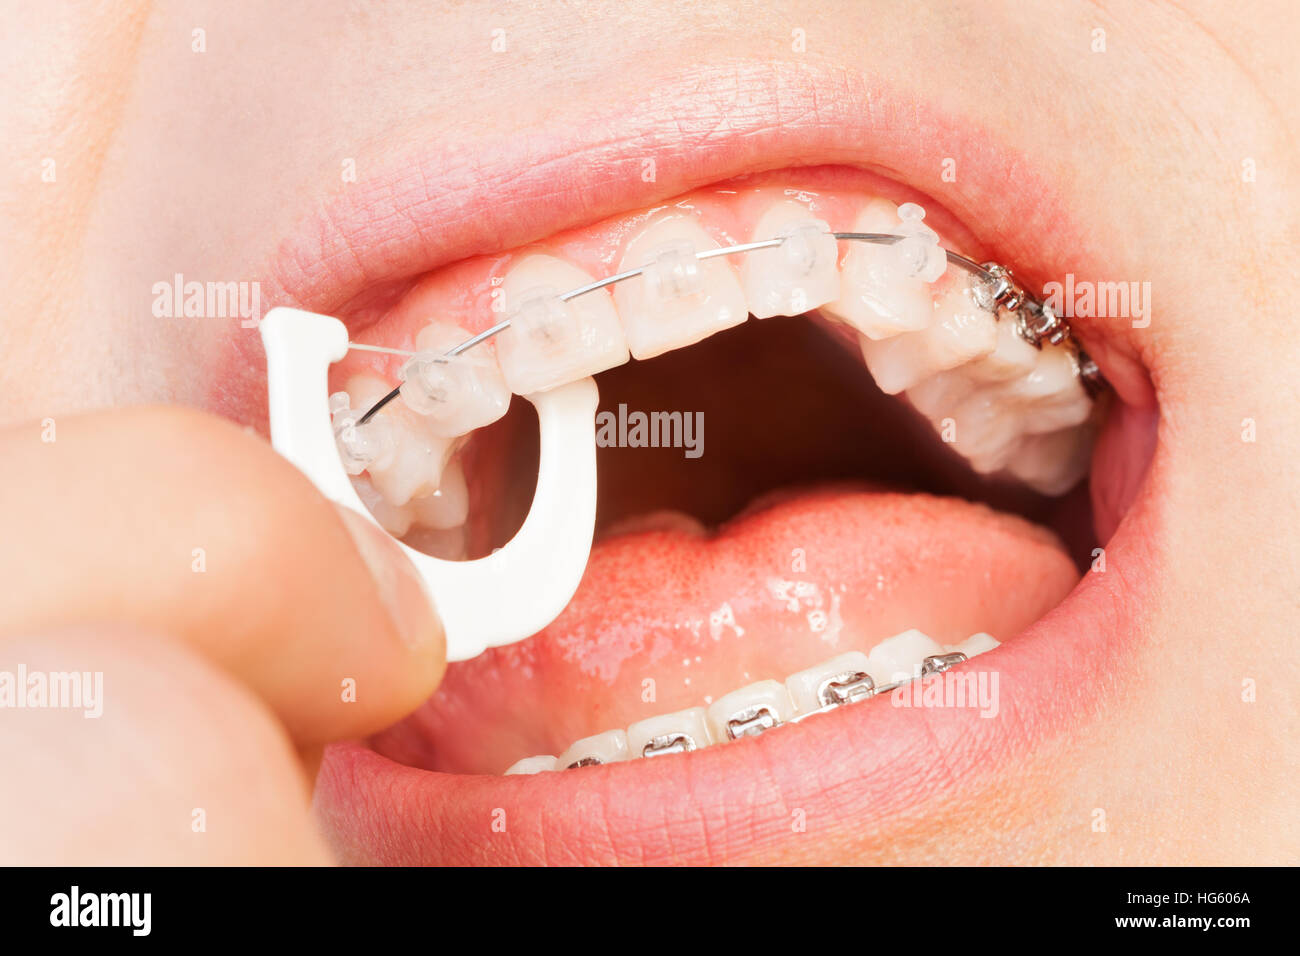 Man with braces using floss for upper jaw hygiene Stock Photo